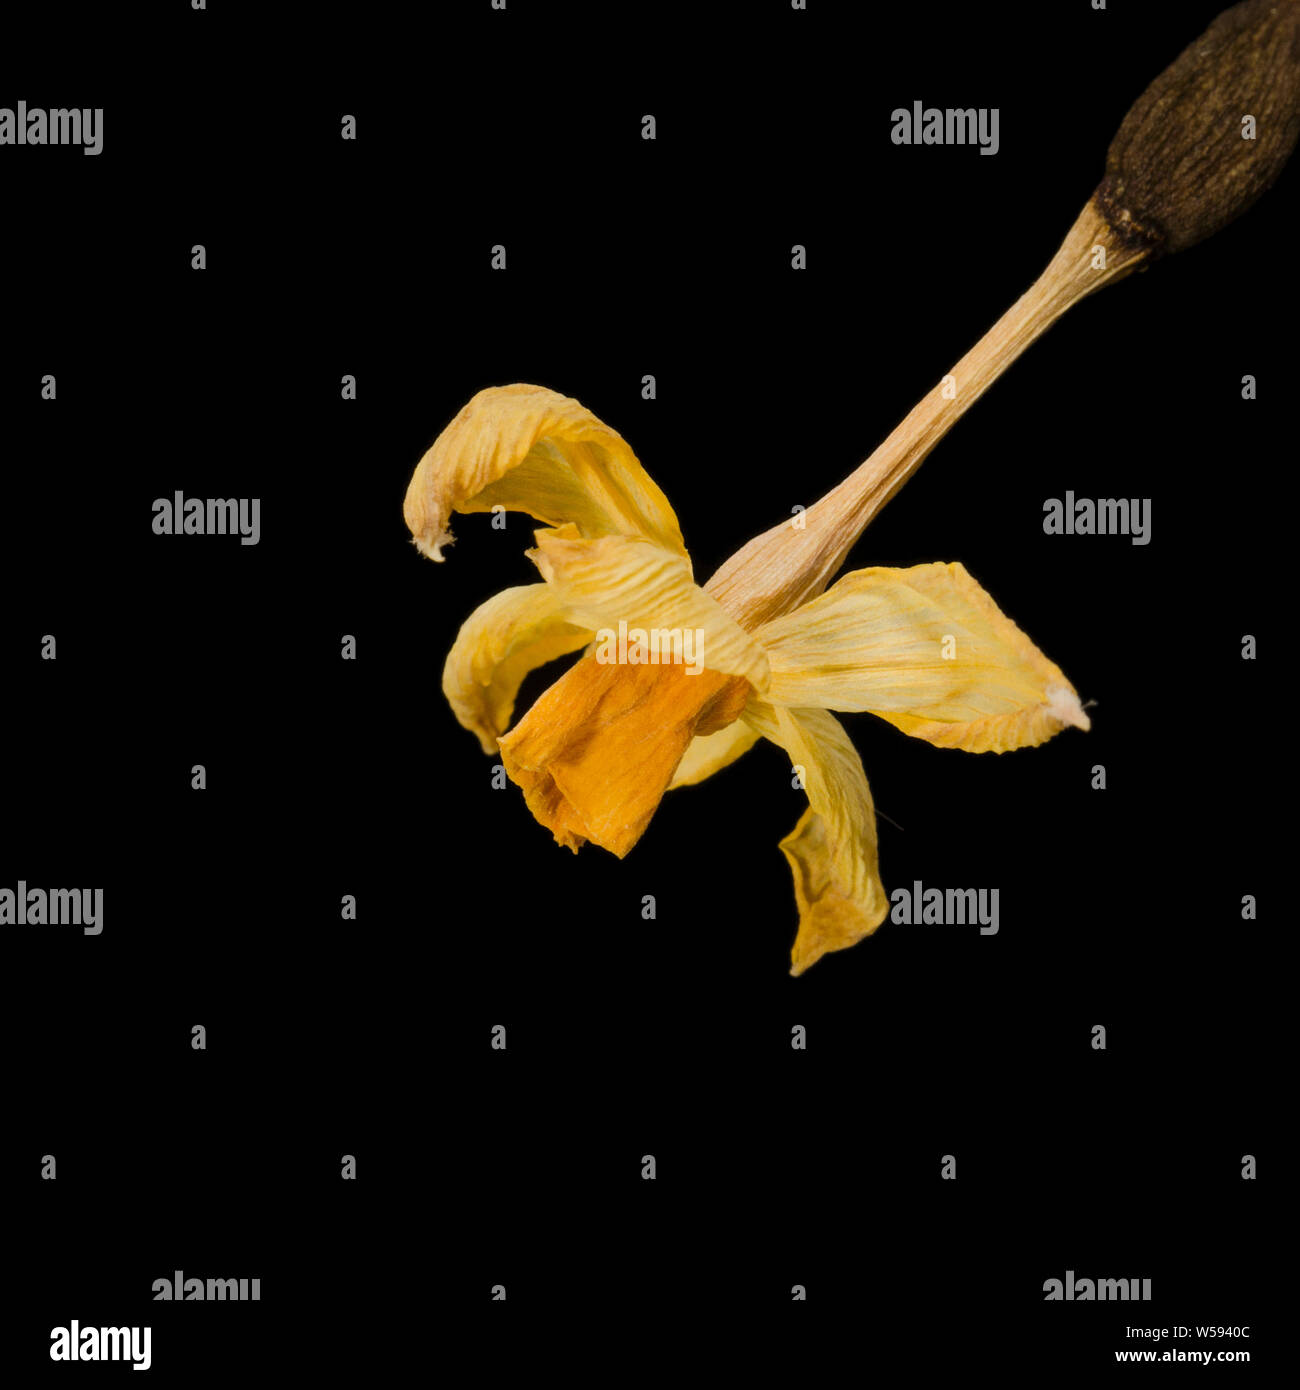 Dried Daffodil Flower on Black Background Stock Photo